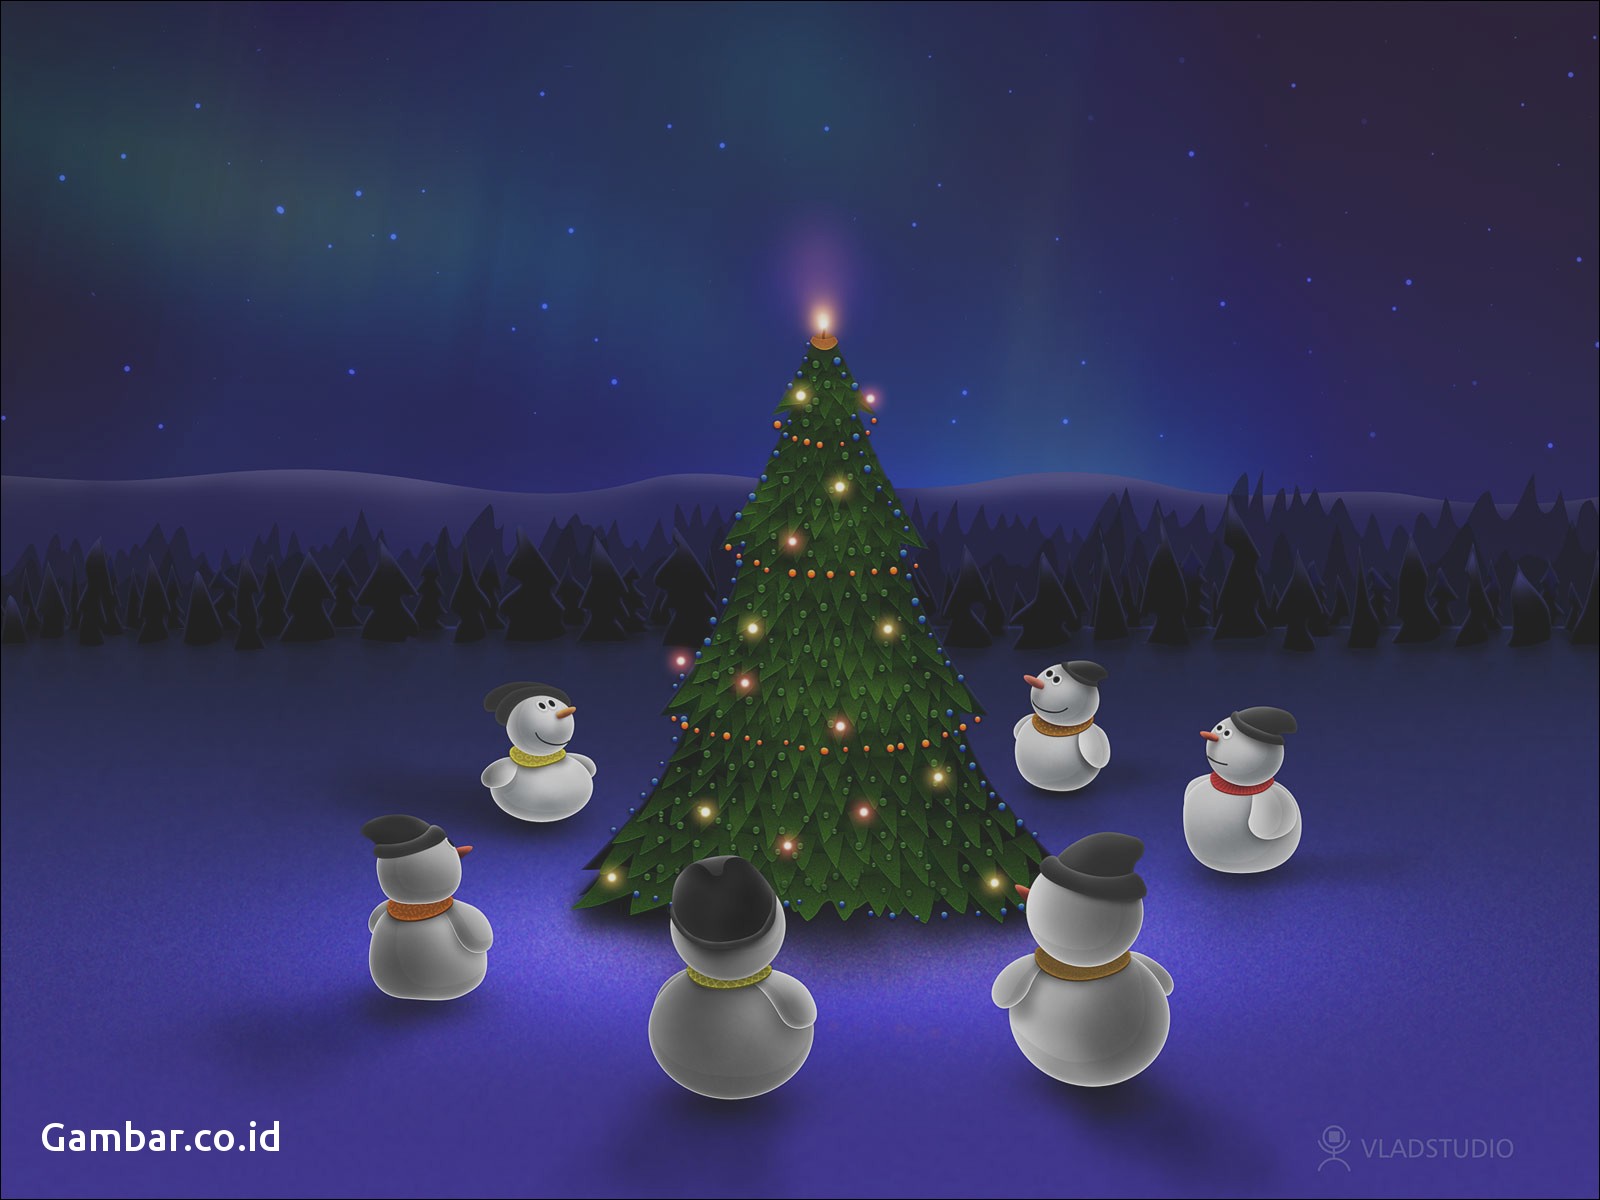 Download Image - Full Hd Fireplace Christmas , HD Wallpaper & Backgrounds